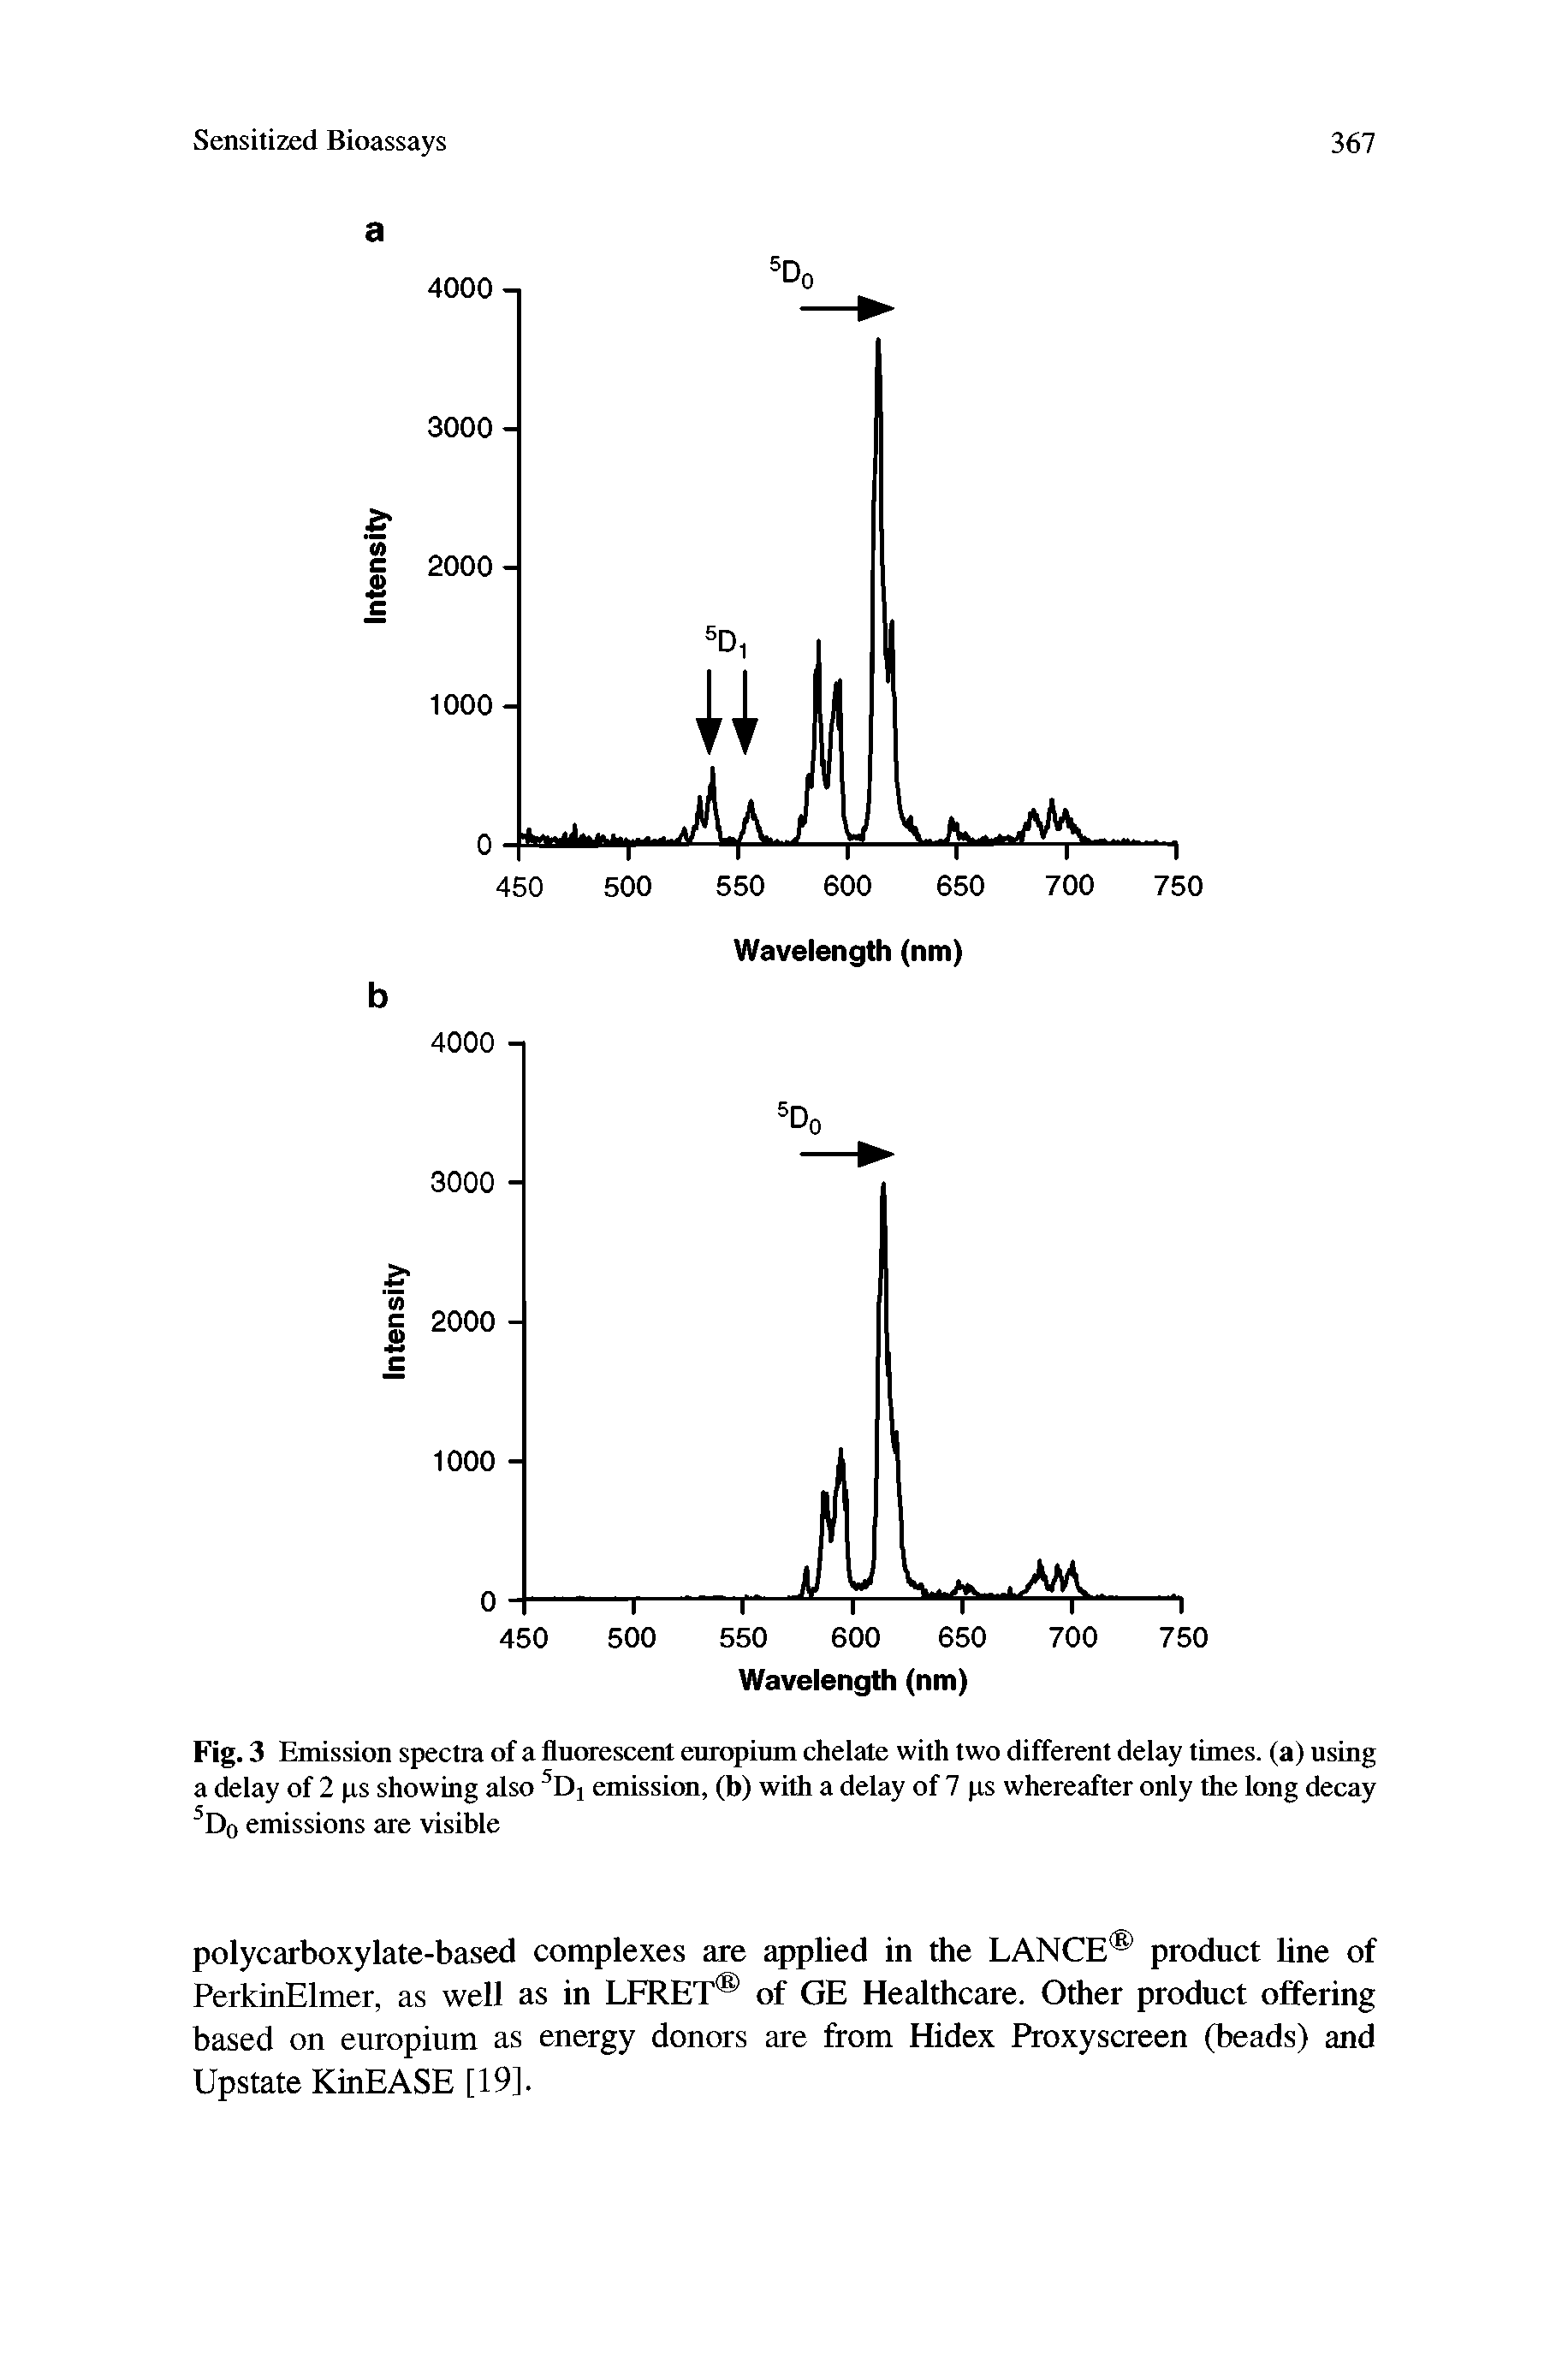 Fig. 3 Emission spectra of a fluorescent europium chelate with two different delay times, (a) using a delay of 2 ps showing also Di emission, (b) with a delay of 7 ps whereafter only the long decay Do emissions are visible...